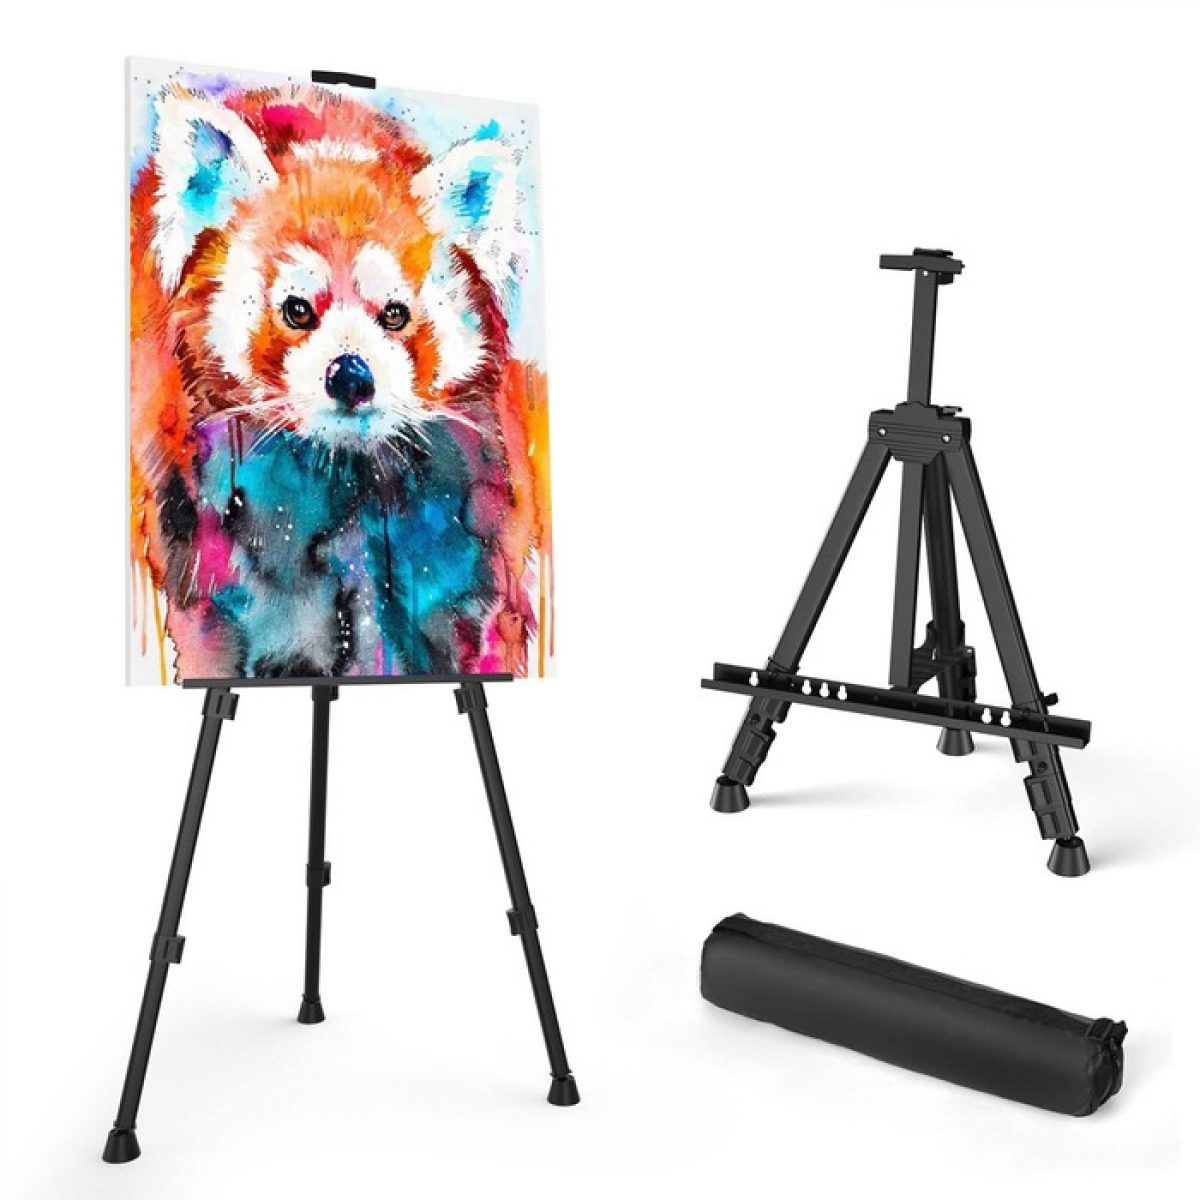 VISWIN 63 Wooden Tripod Display Easel Stand for Wedding Sign, Poster, A-Frame Artist Easel Floor with Tray for Painting, Canvas, Foldable Easel 